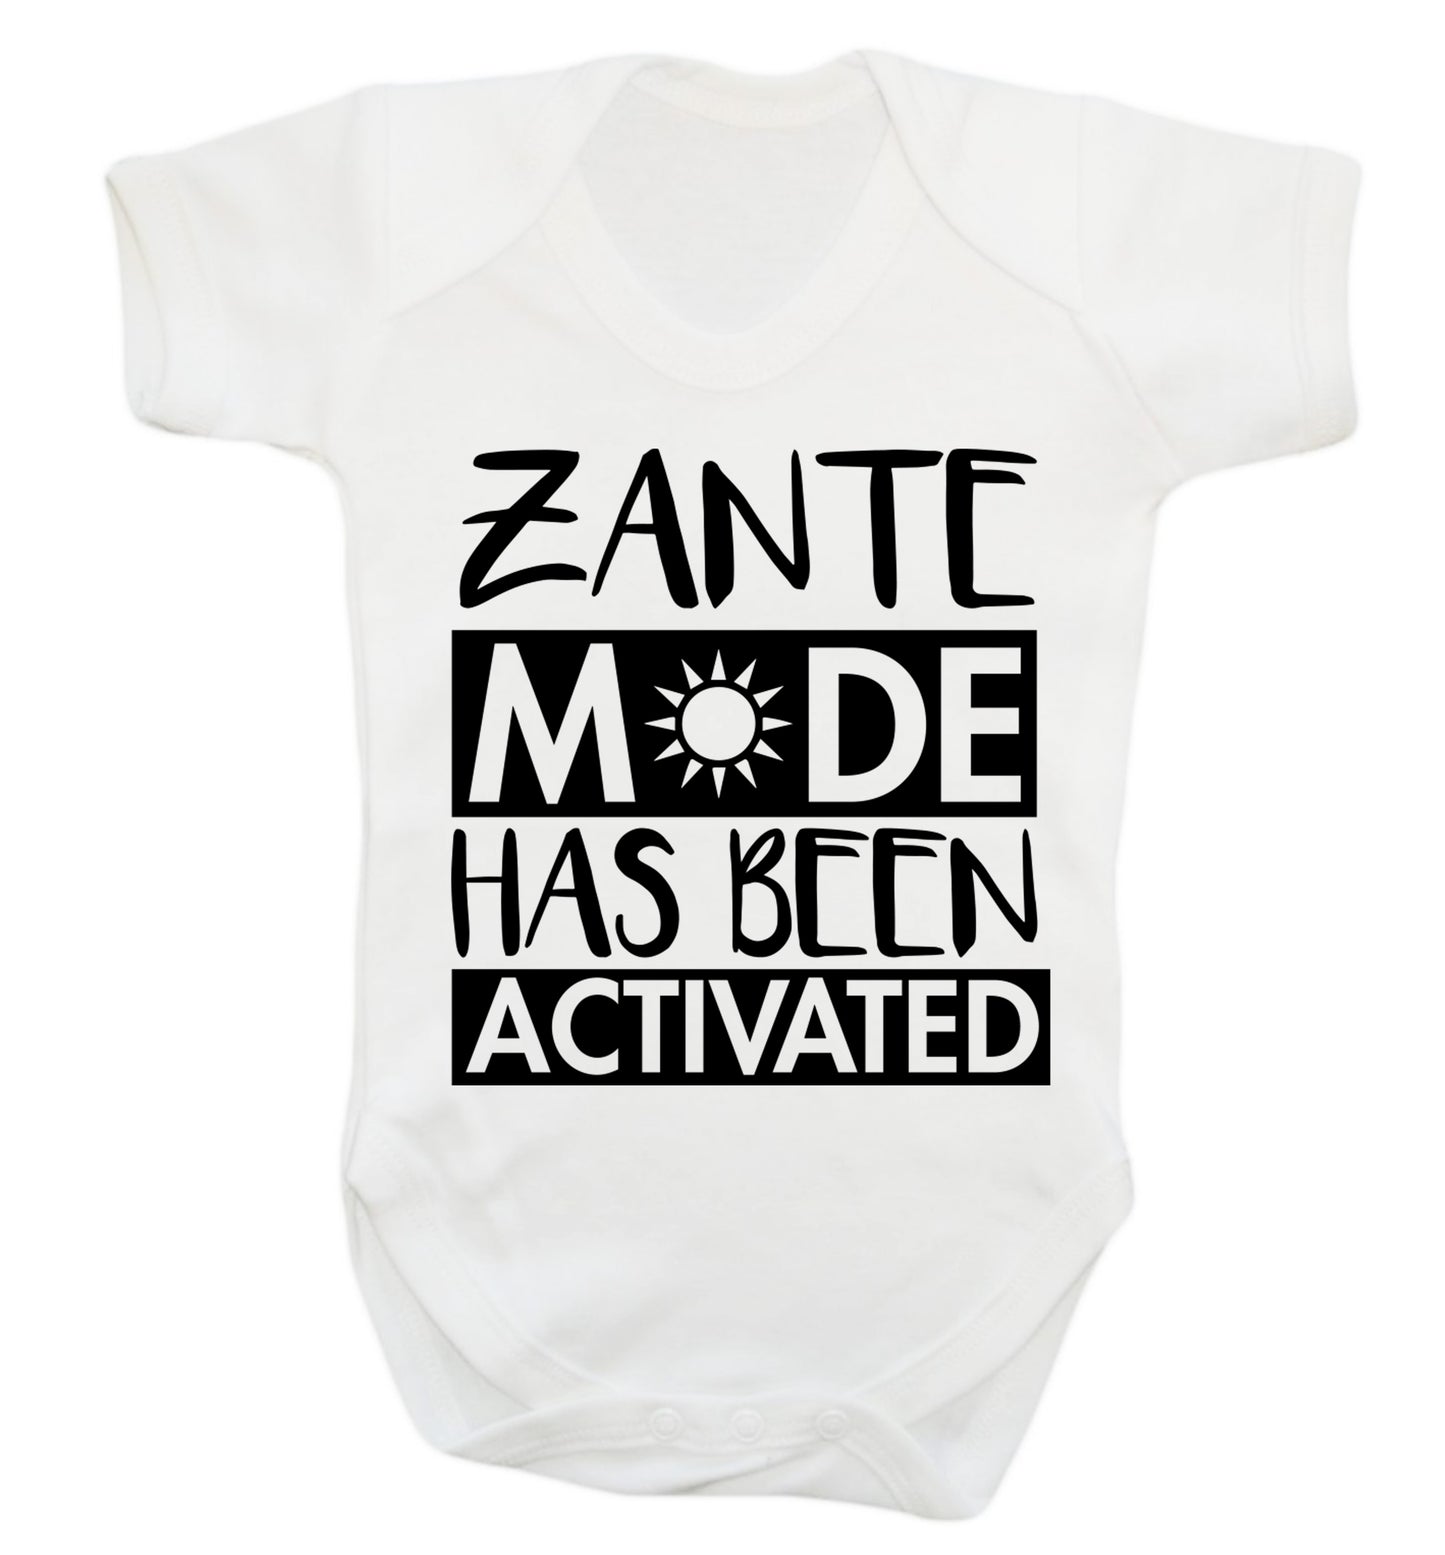 Zante mode has been activated Baby Vest white 18-24 months